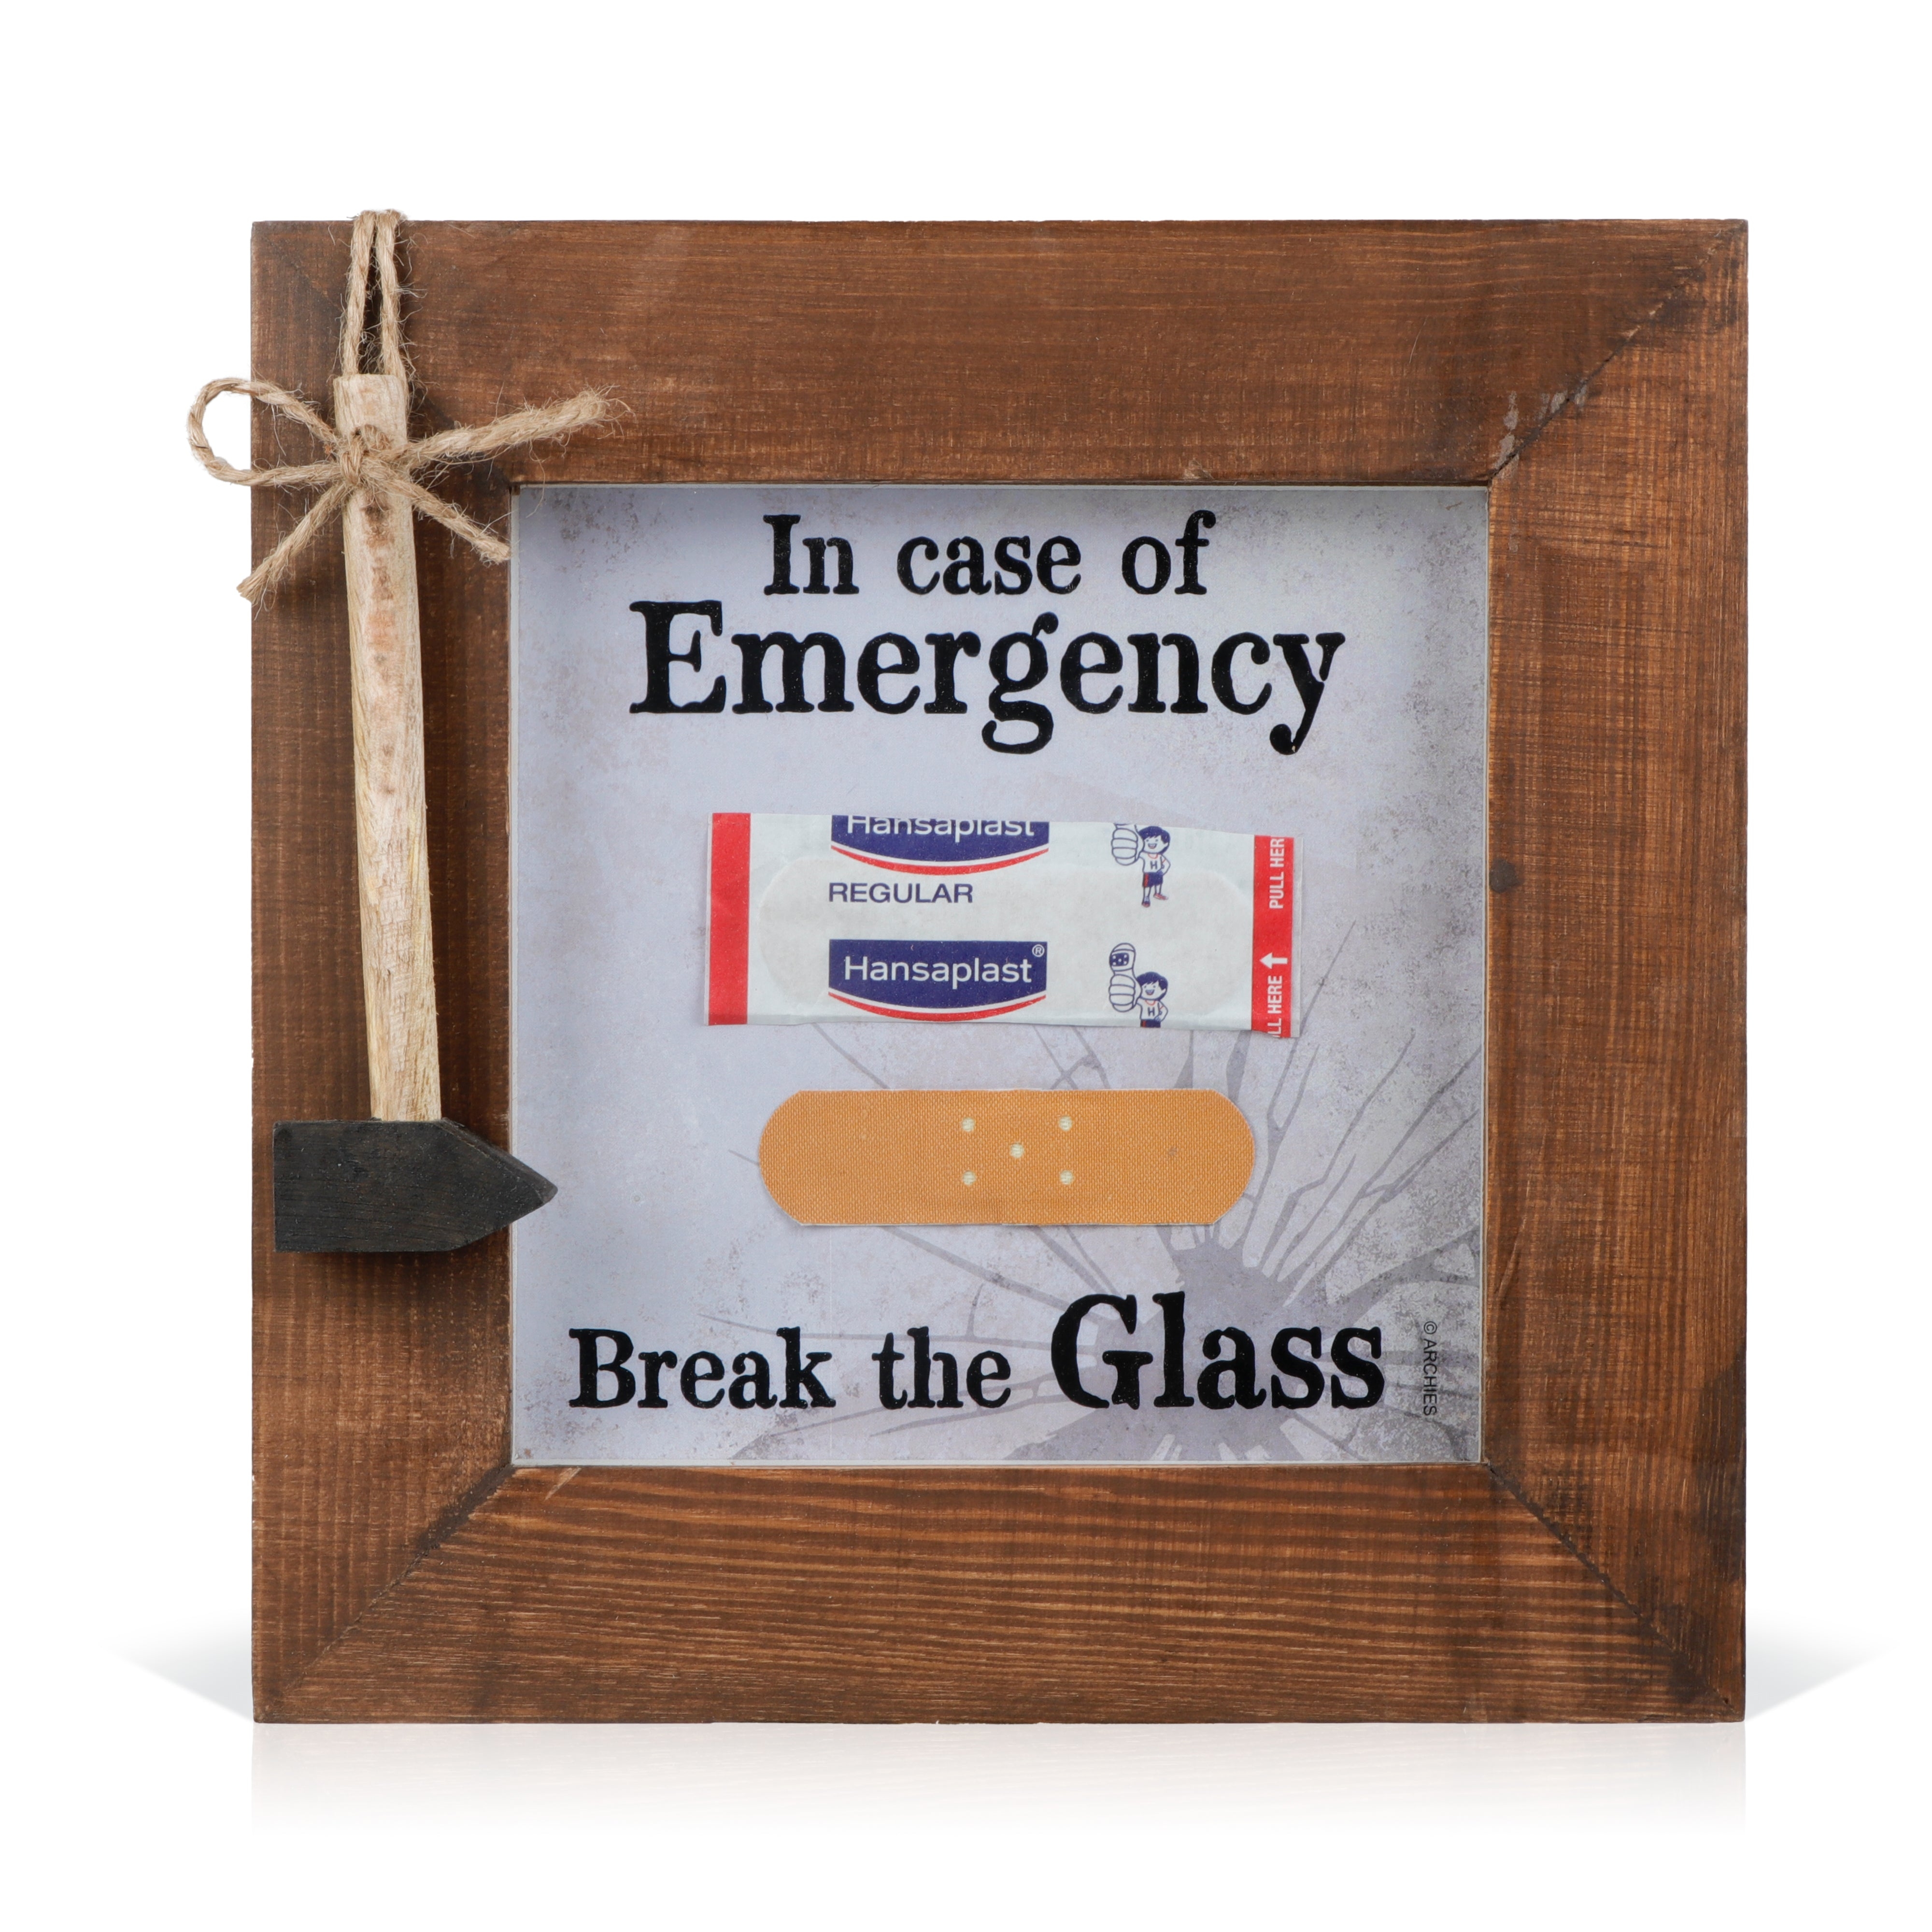 Archies KEEPSAKE QUOTATION-  HAMMER  BAND AID For gifting and Home décor